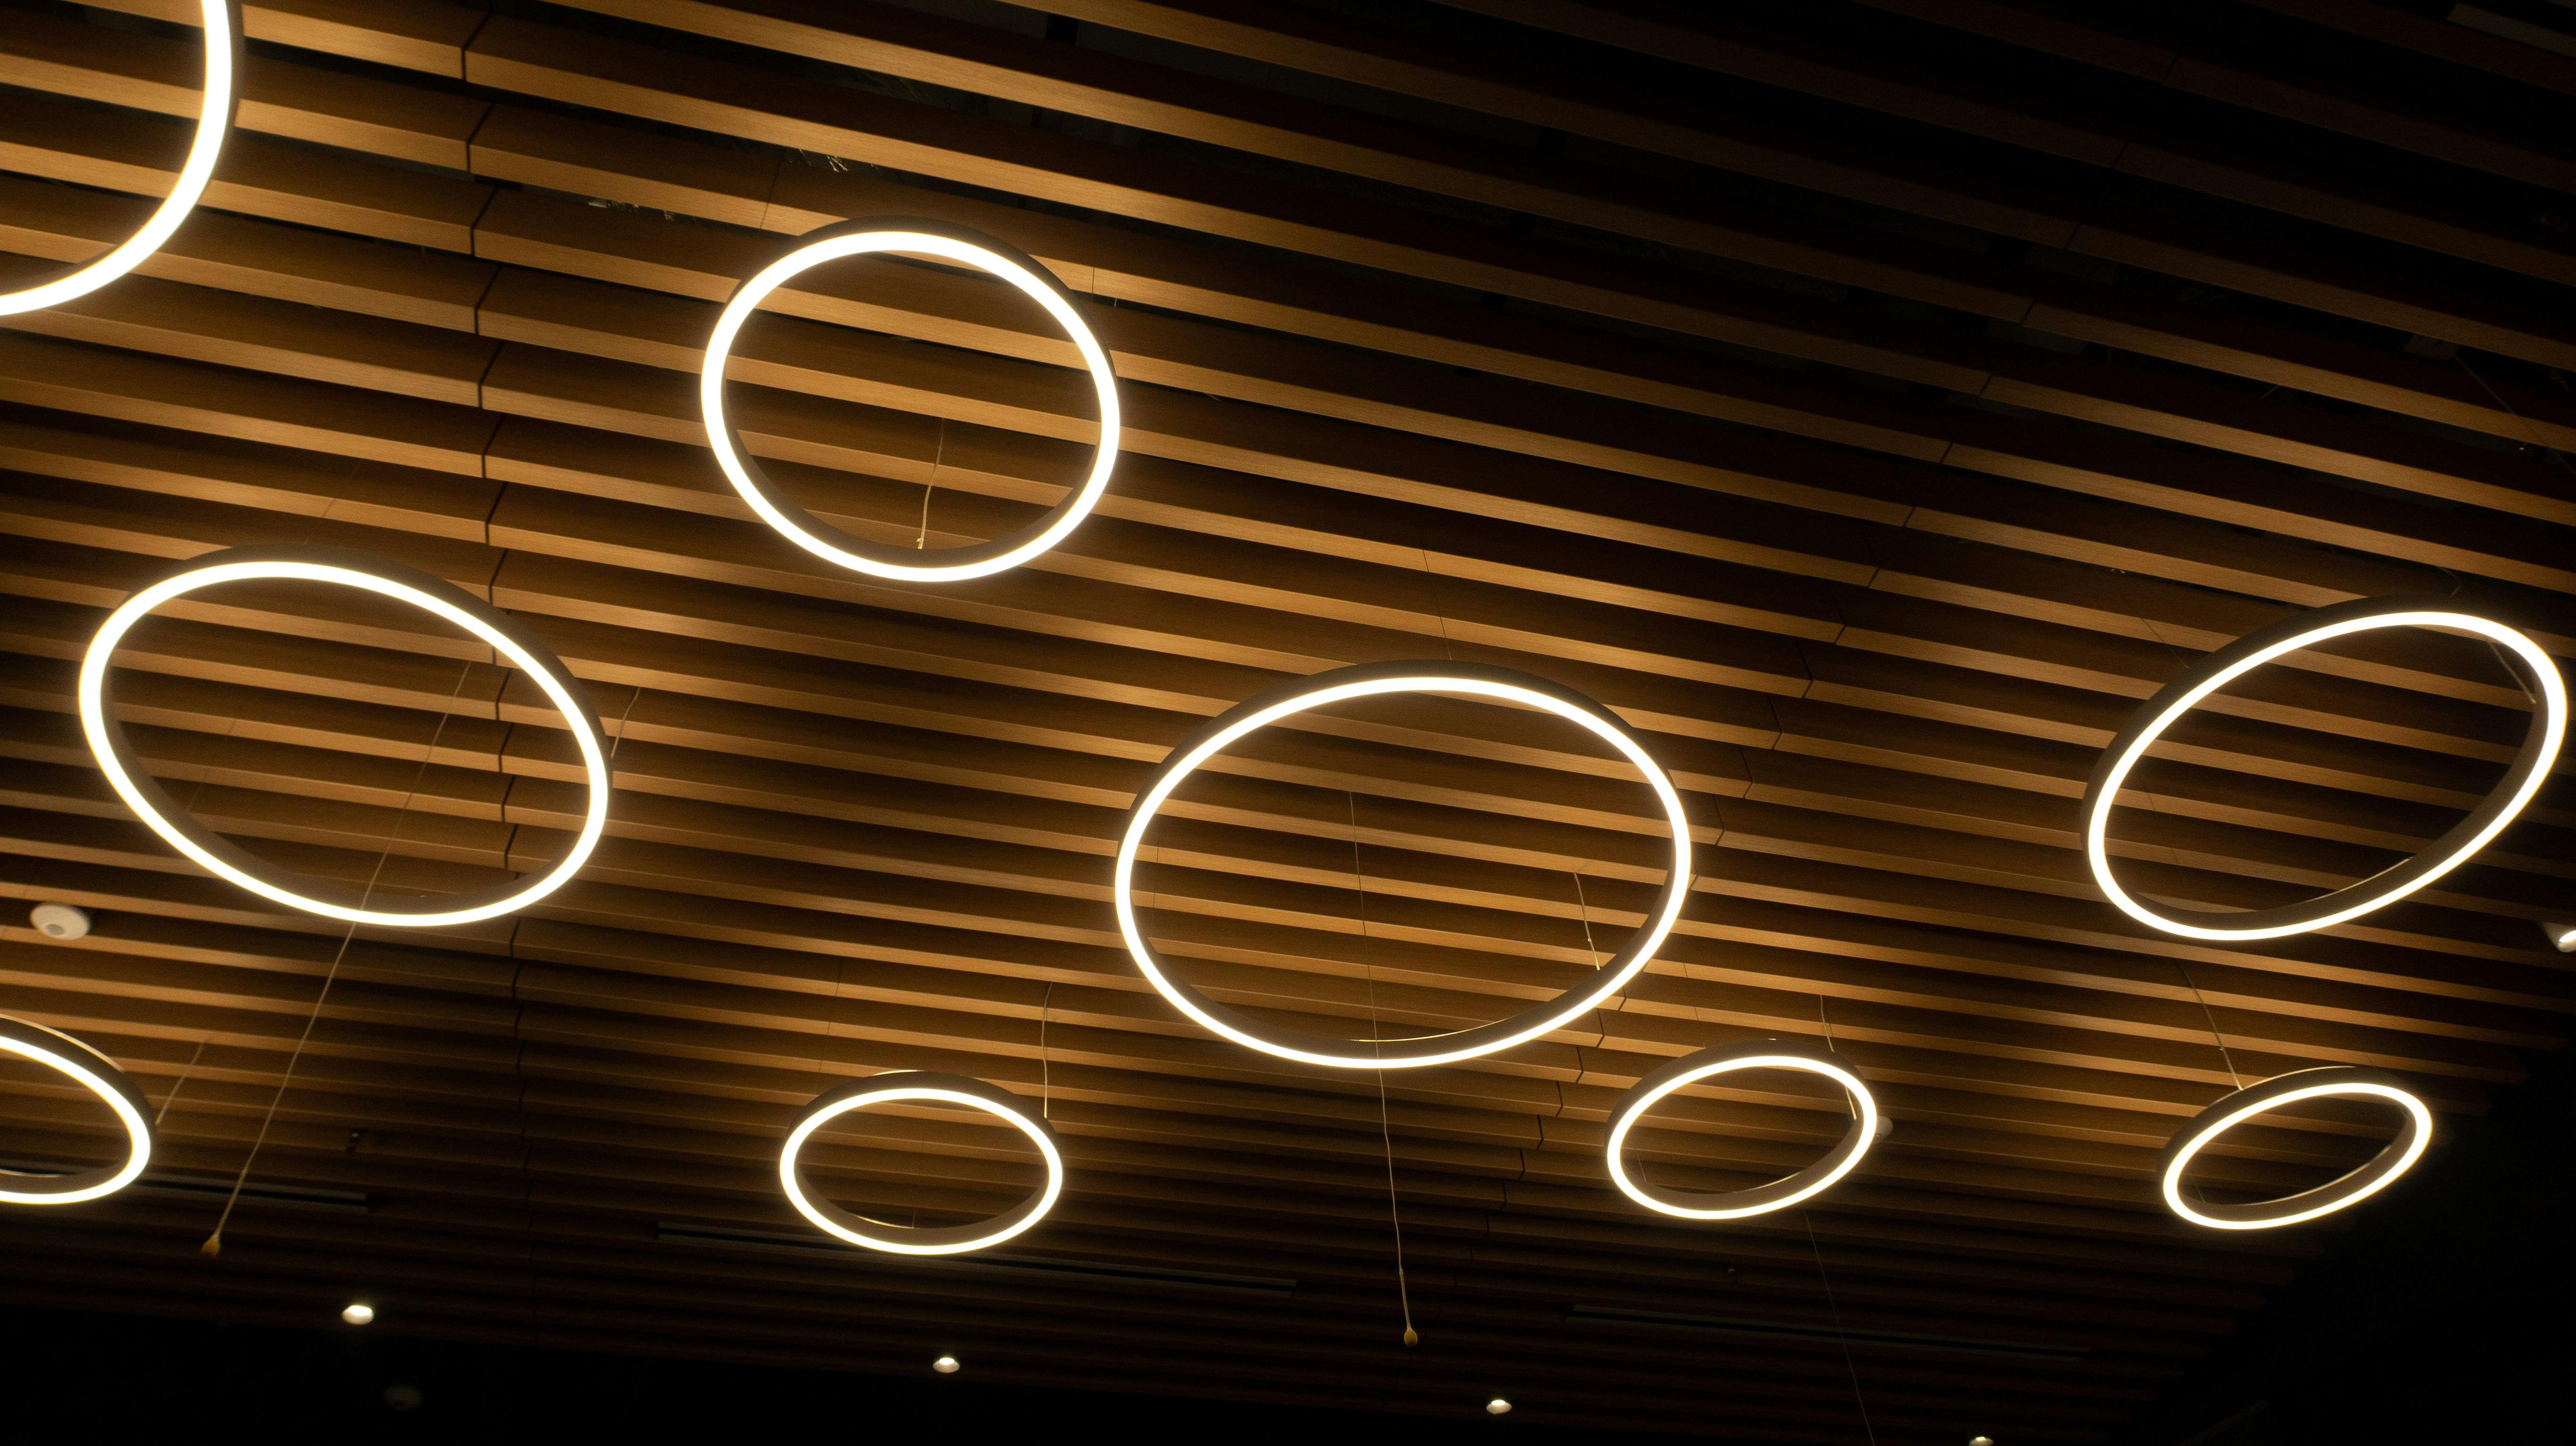 Yellow Ring Lights in the Ceiling · Free Stock Photo